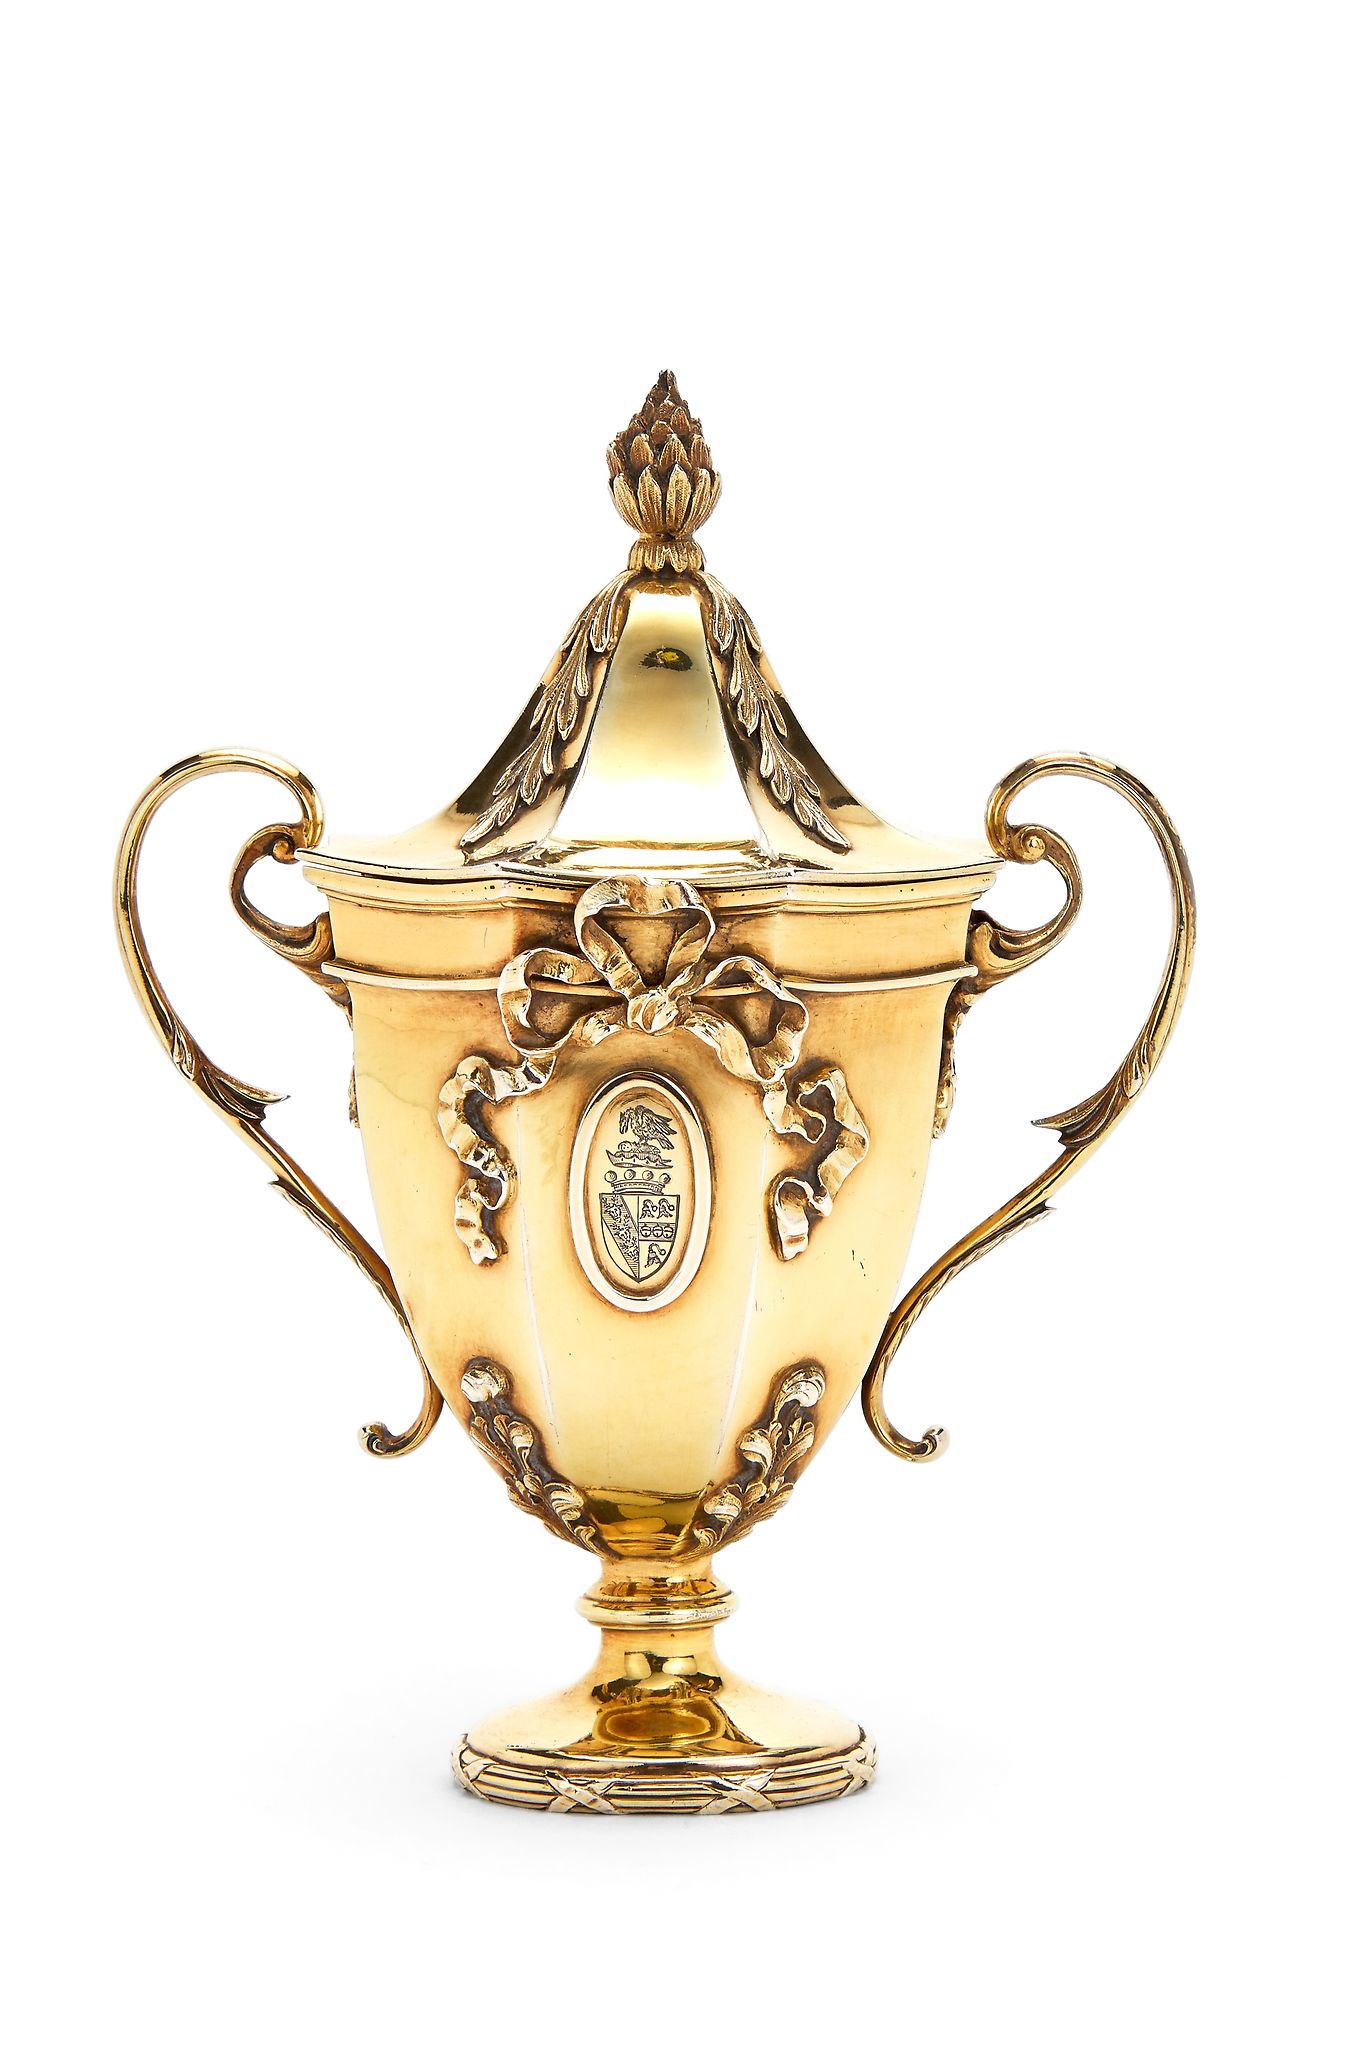 An Edwardian silver gilt cup and cover by George Fox, London 1903, with a pine cone finial to the